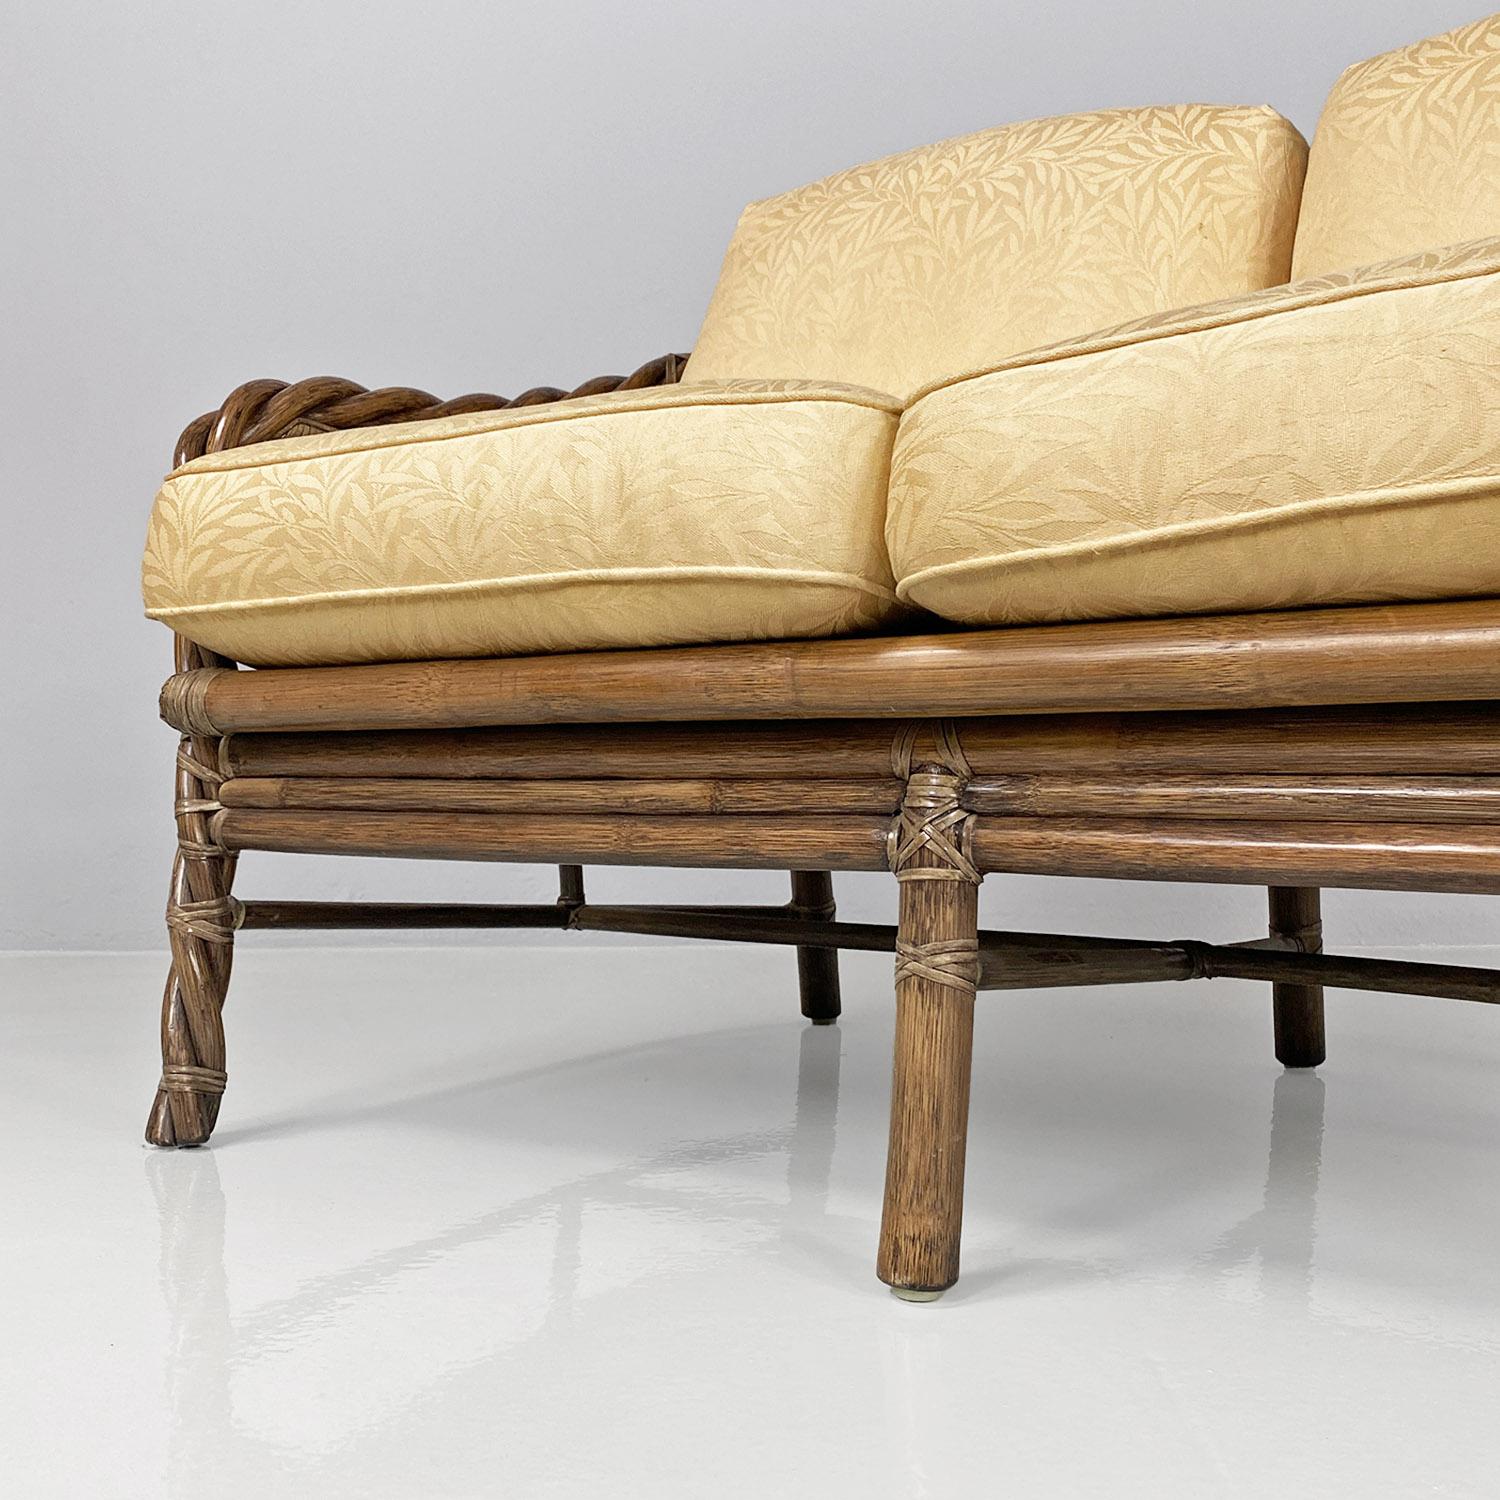 Fabric American modern rattan and beige floreal fabric sofa by McGuire Company, 1970s For Sale